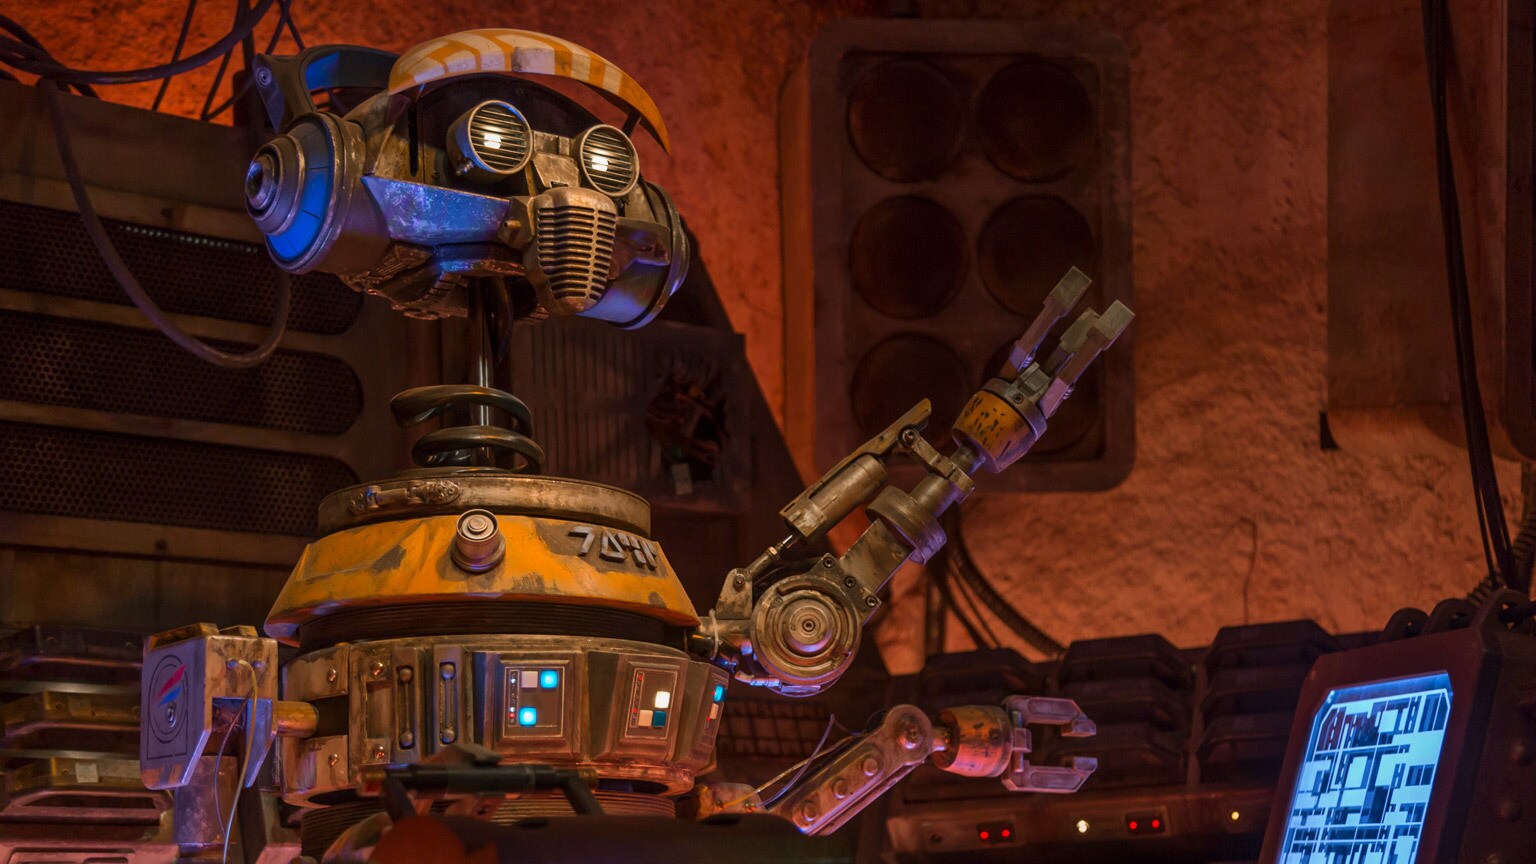 D23 Expo 2019: 5 Highlights from the Music and Sounds of Star Wars: Galaxy’s Edge Panel